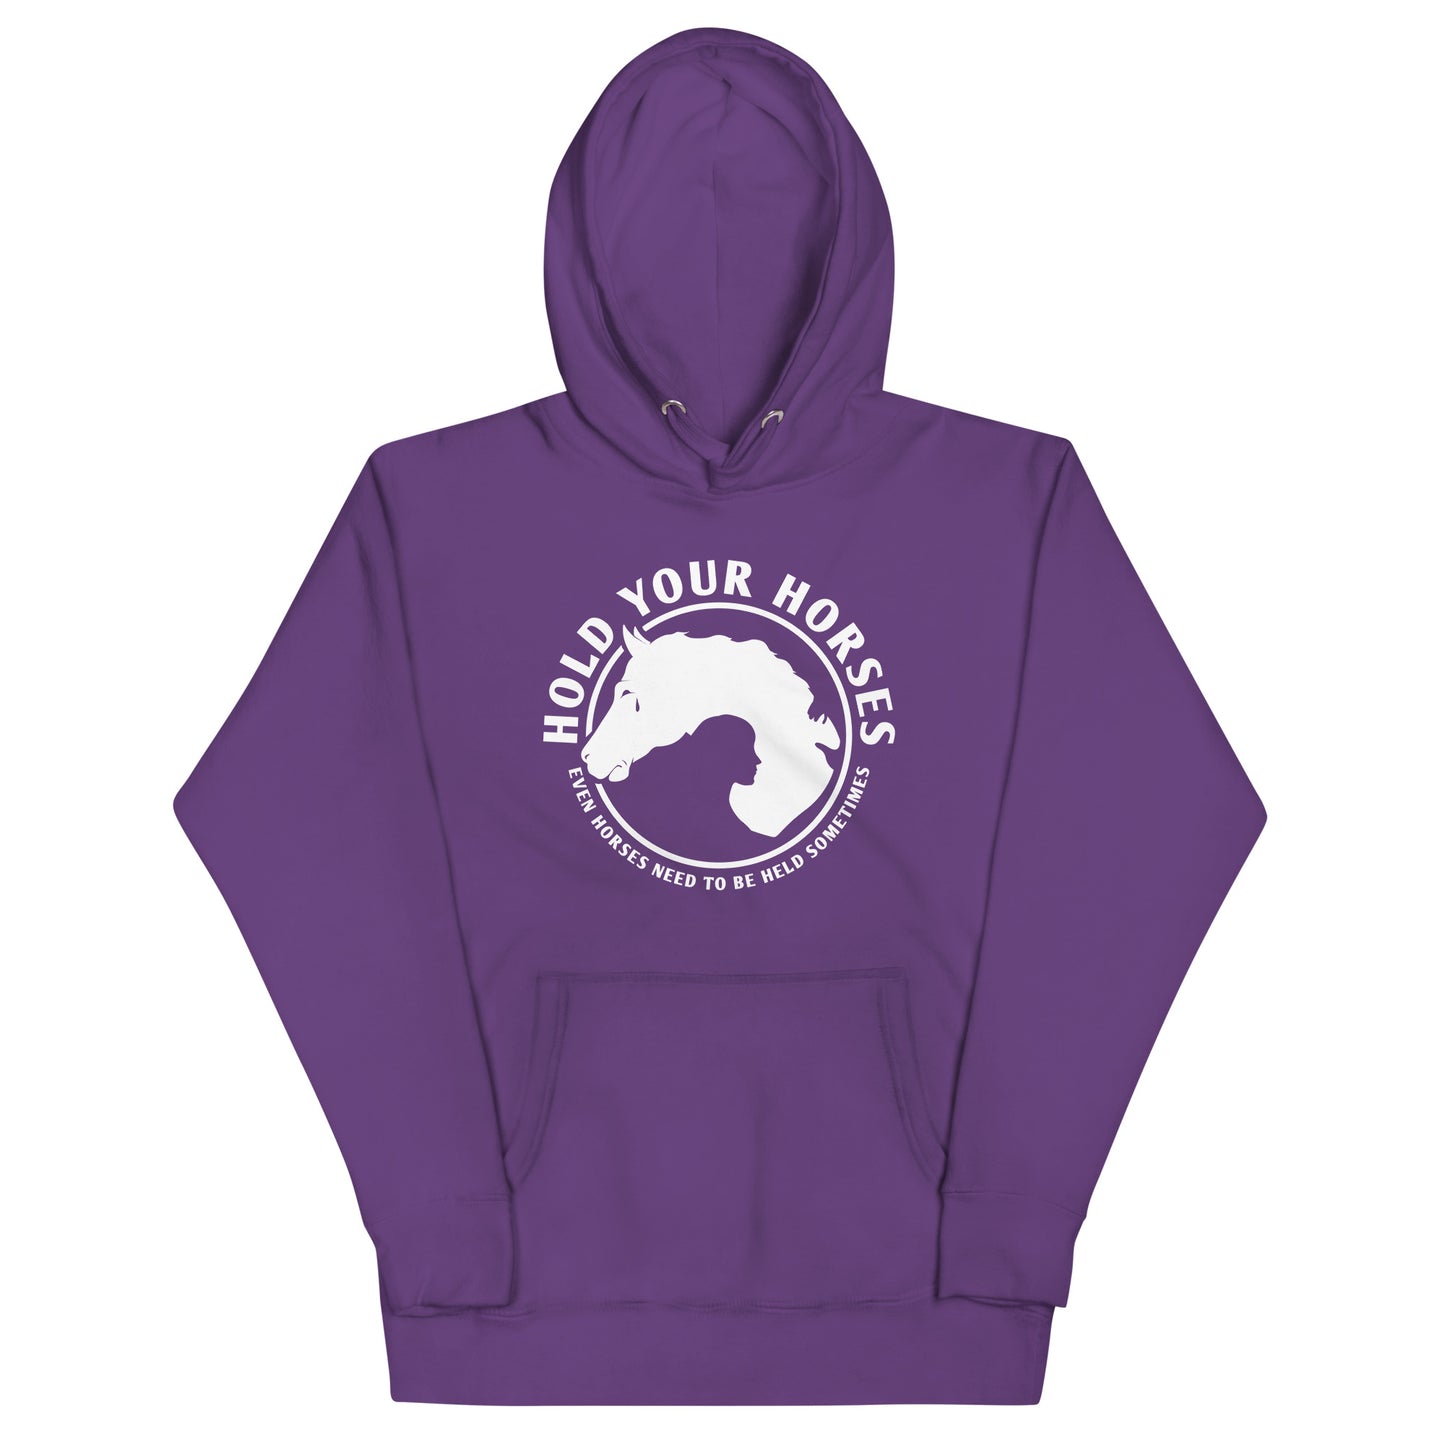 Hold Your Horses Unisex Hoodie